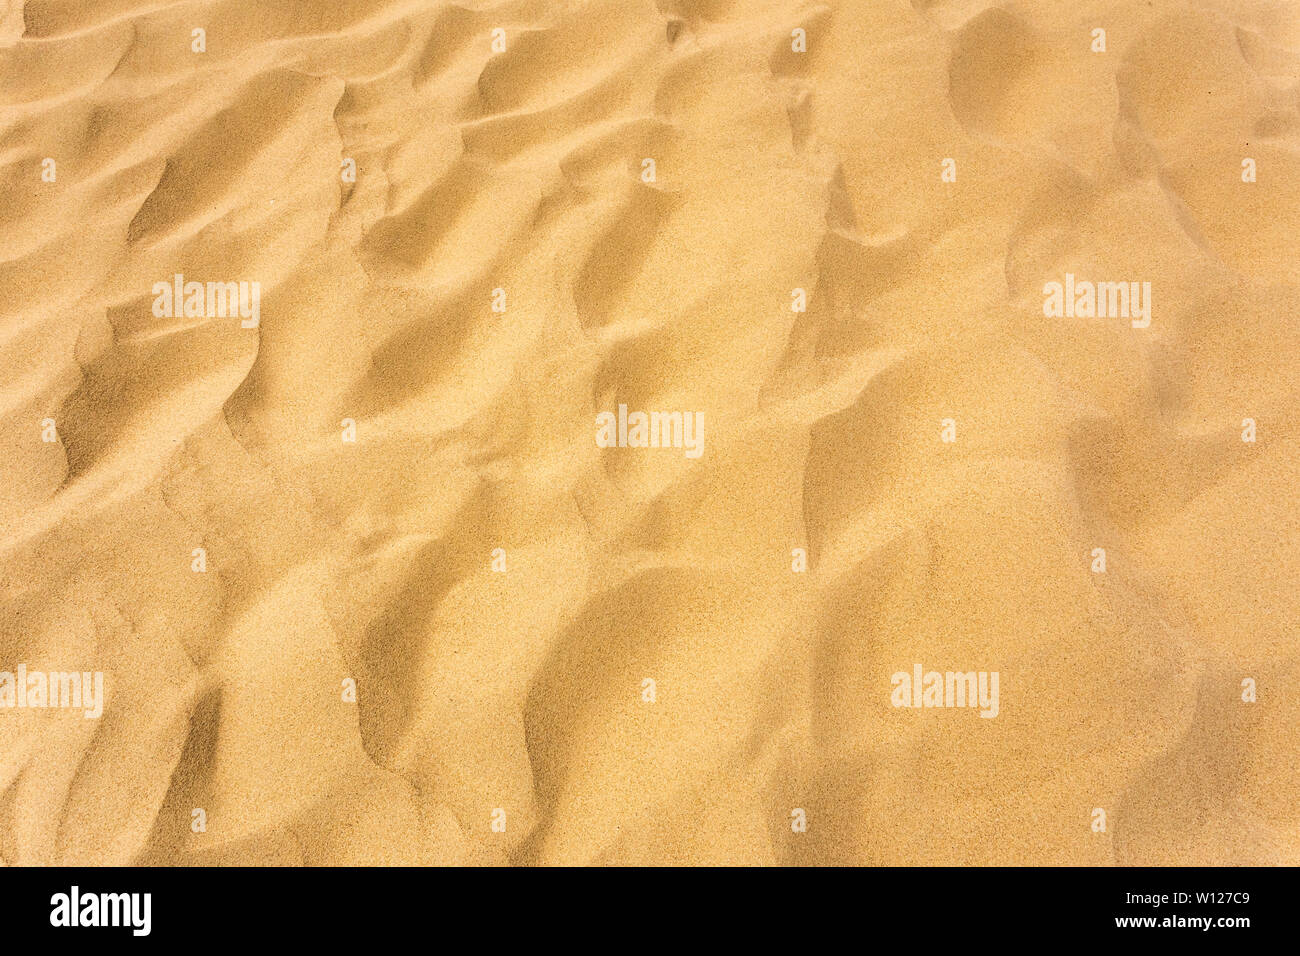 Background Image Of Desert Sand In The Dunes Stock Photo Alamy